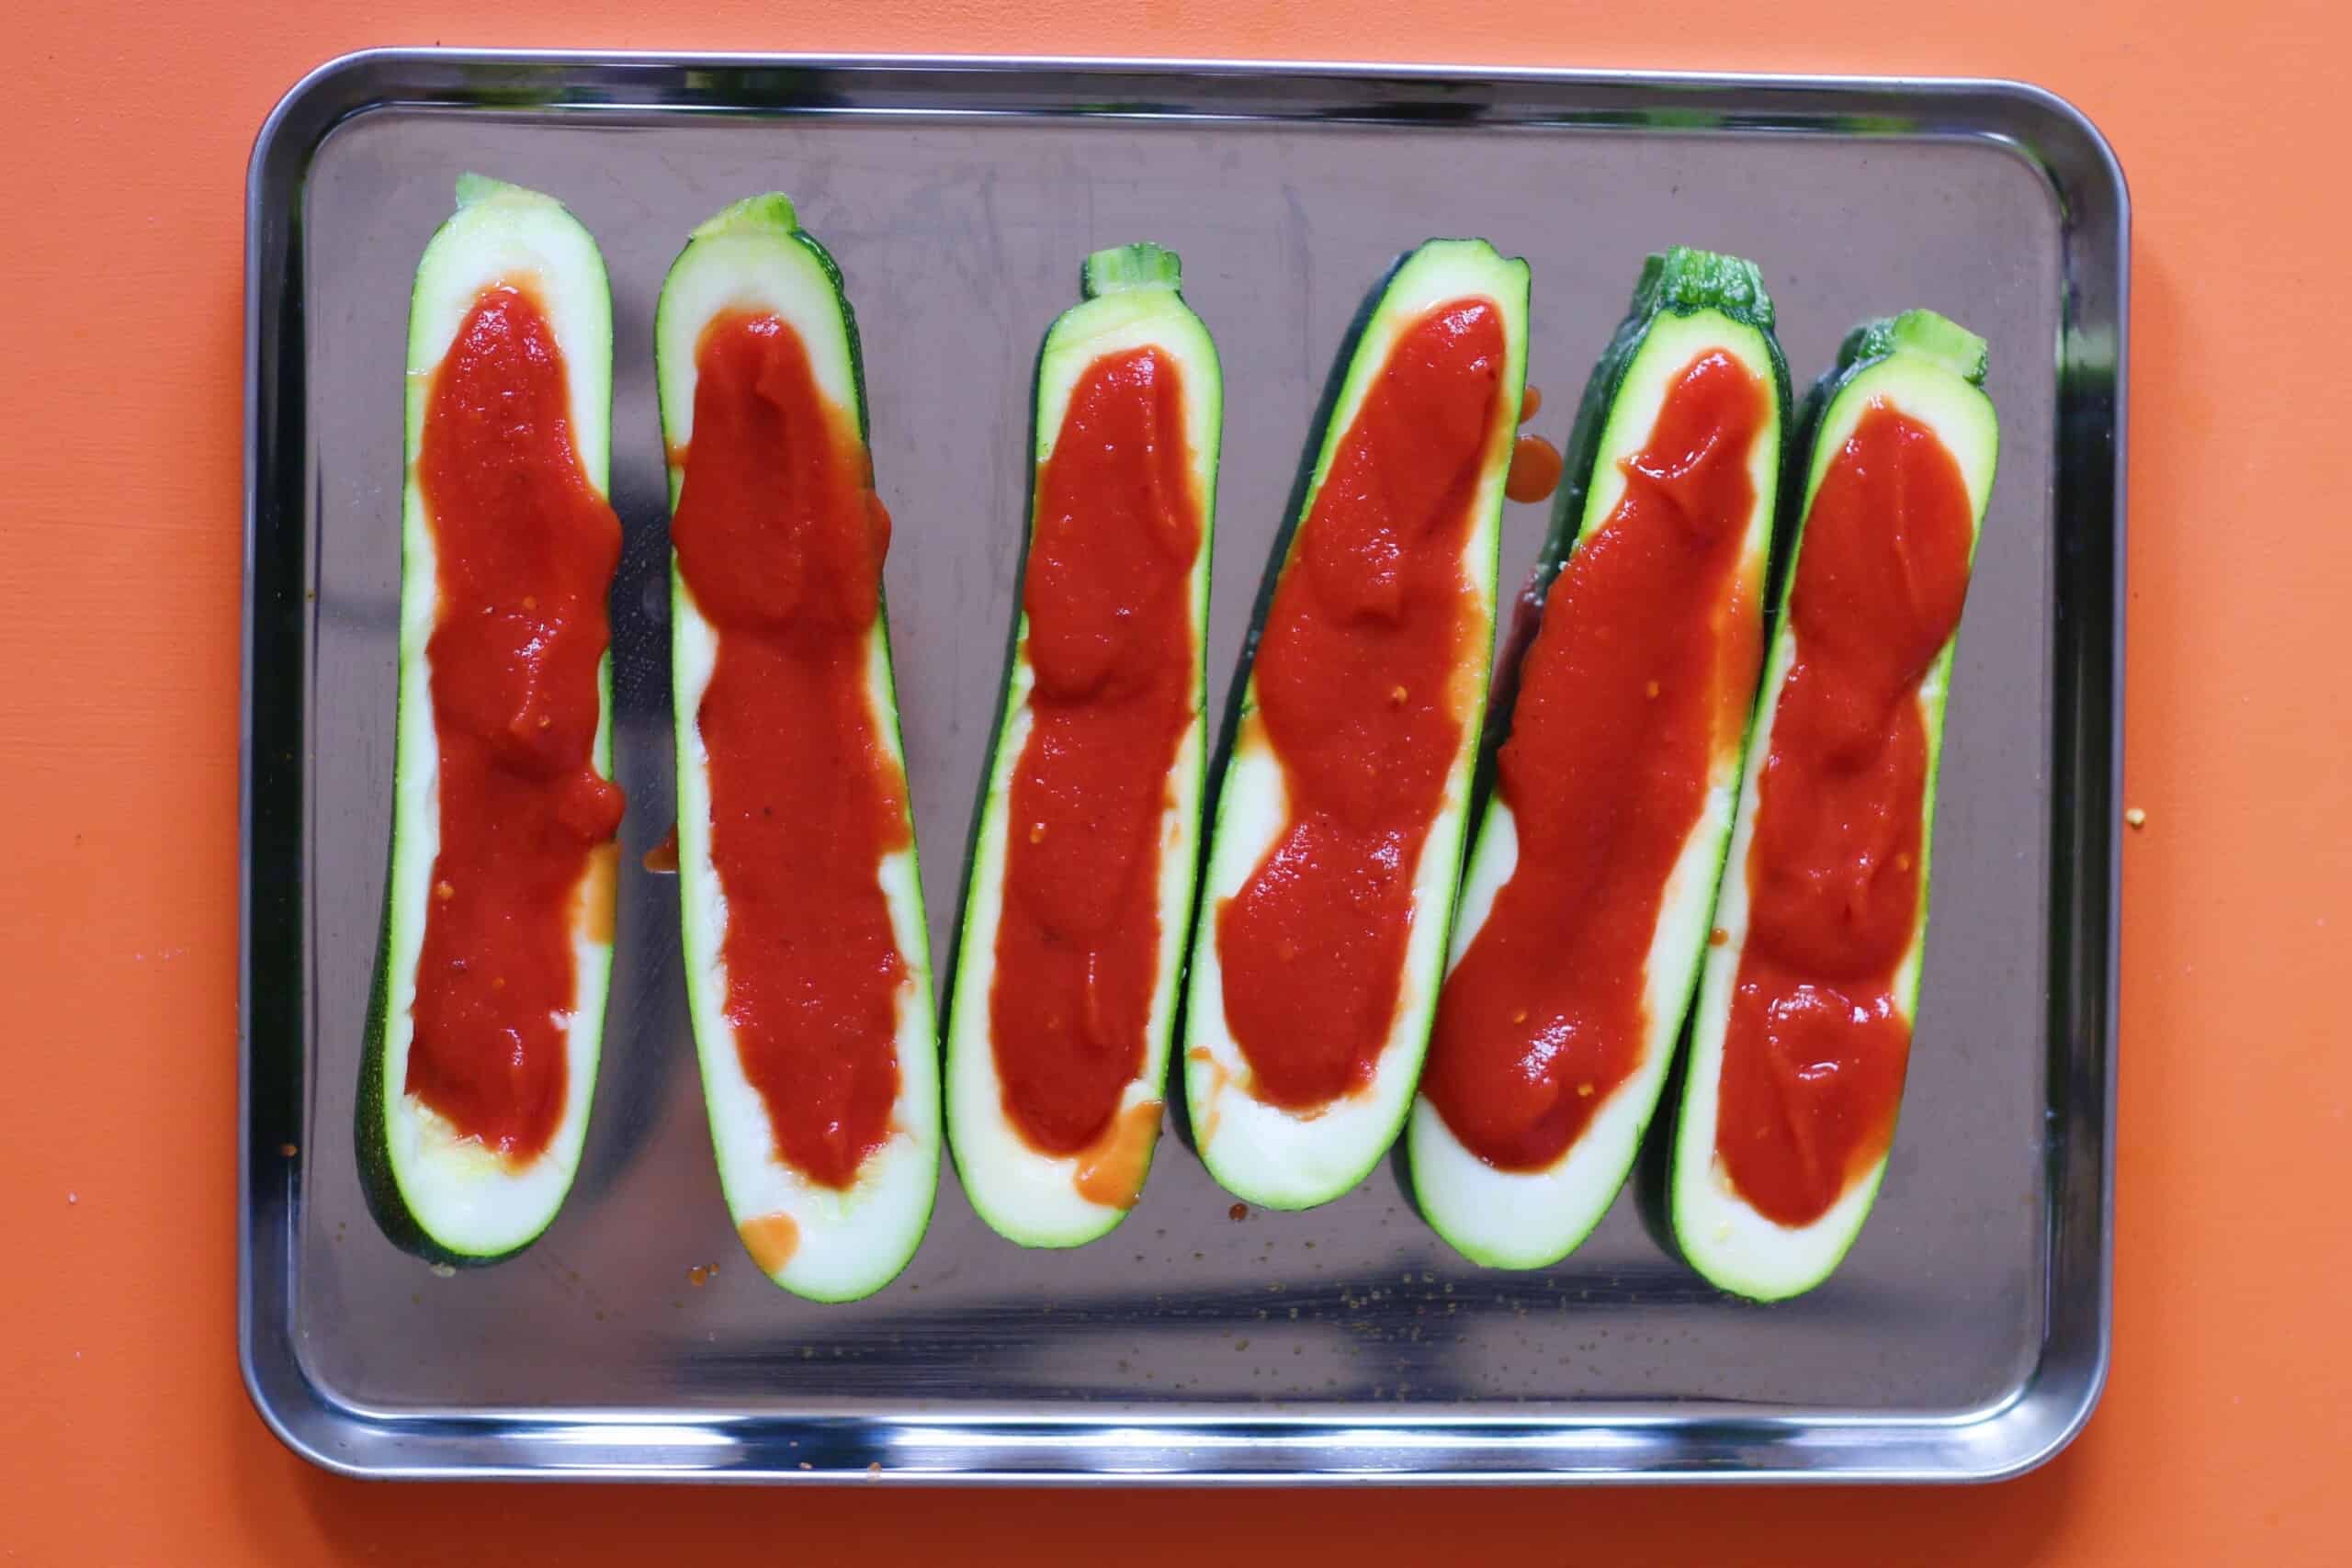 6 courgette boats filling with passata on a stainless steel baking tray on an orange background.